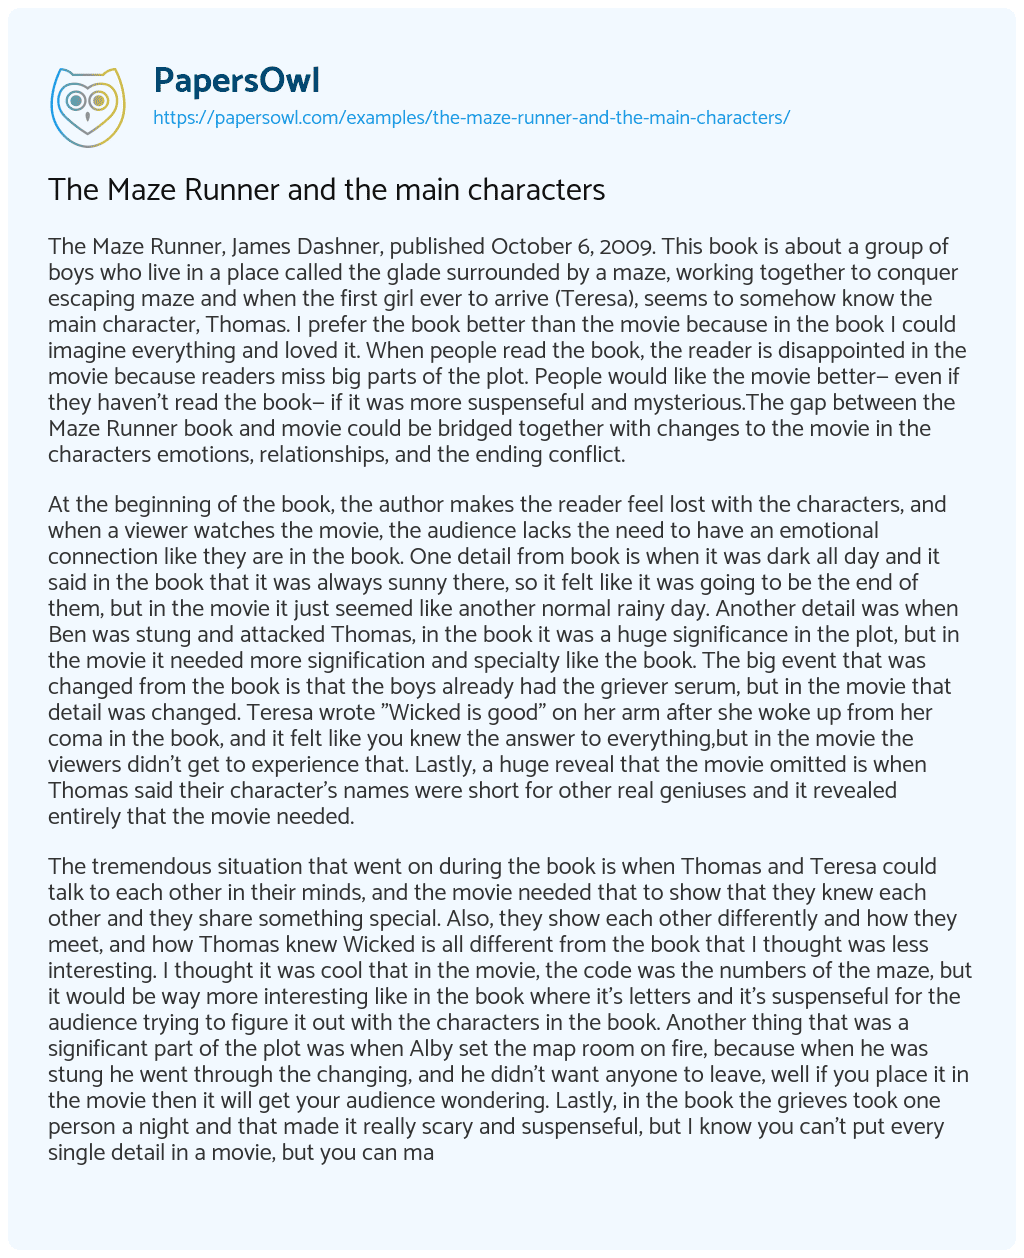 Essay on The Maze Runner and the Main Characters